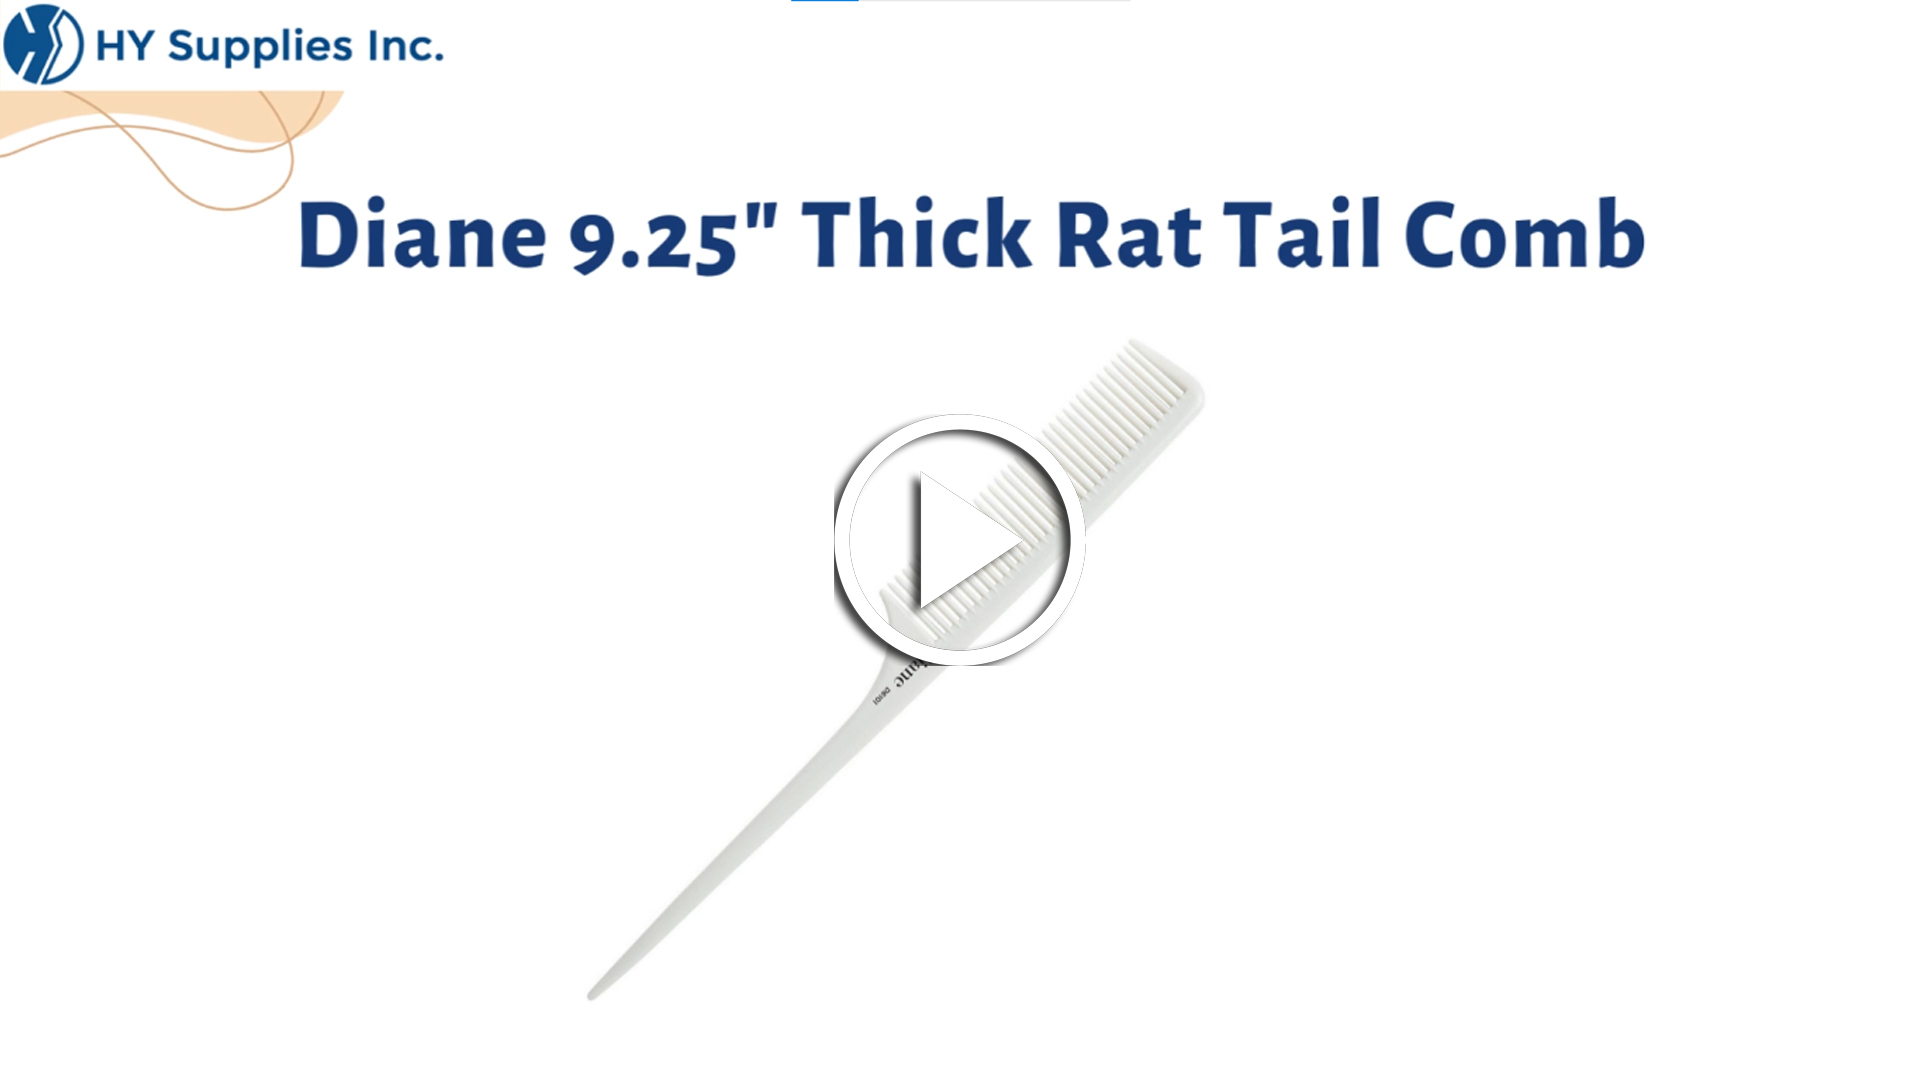 Diane 9.25" Thick Rat Tail Comb